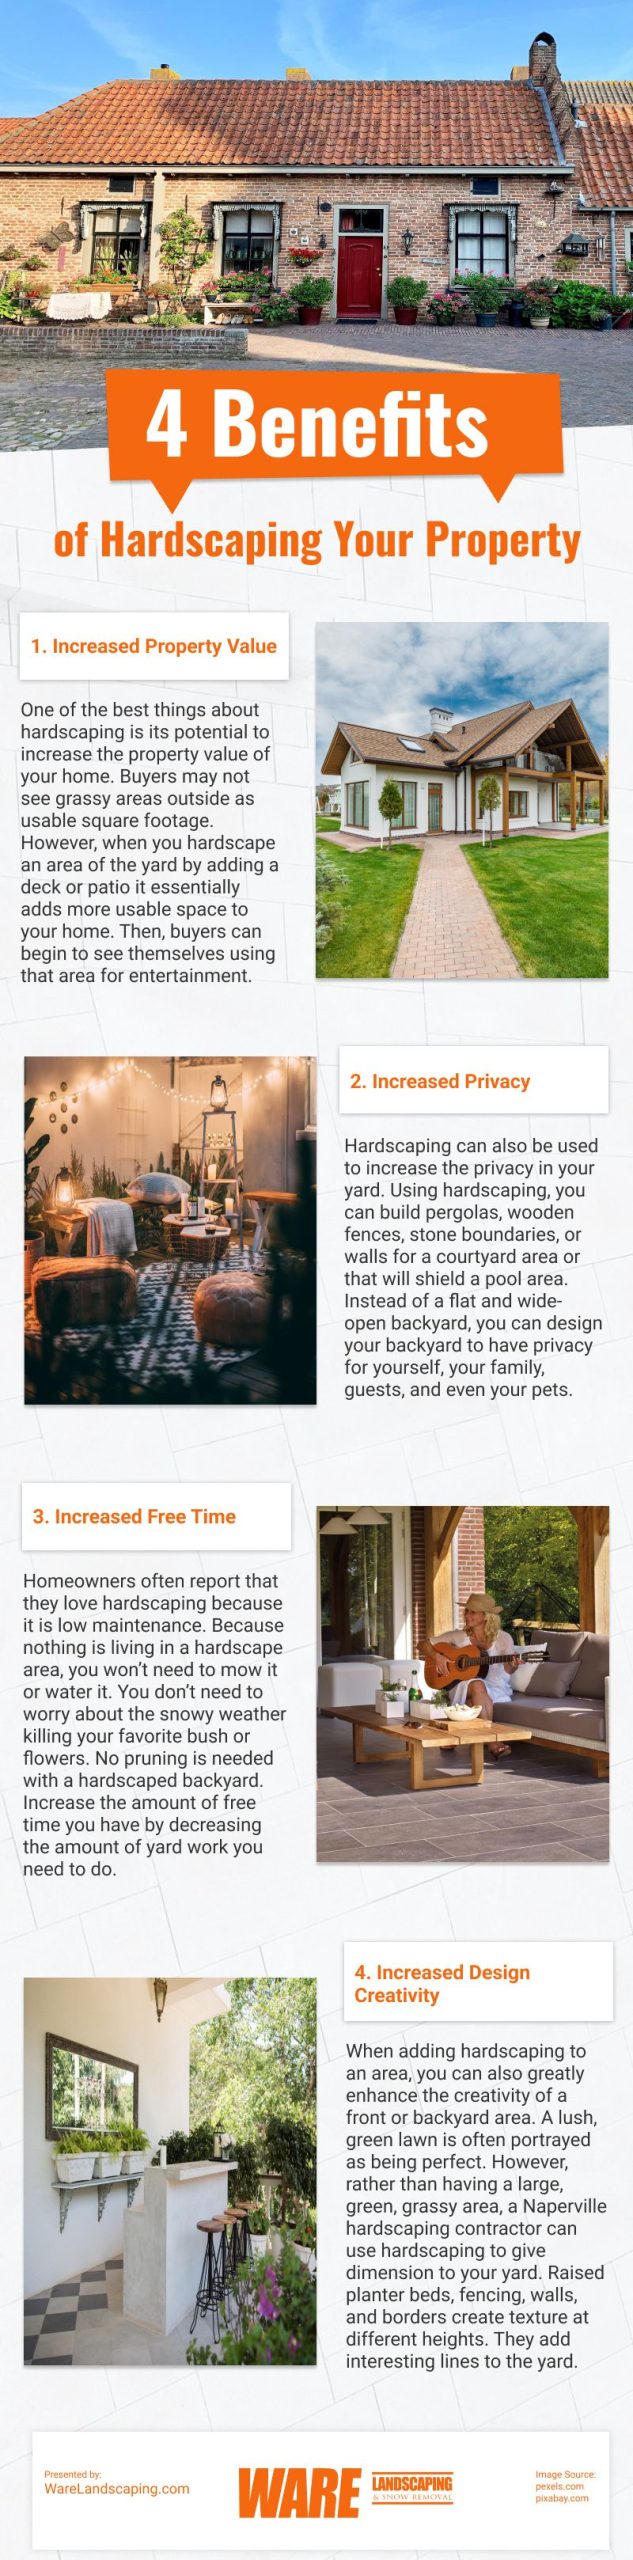 4 Benefits of Hardscaping Your Property Infographic